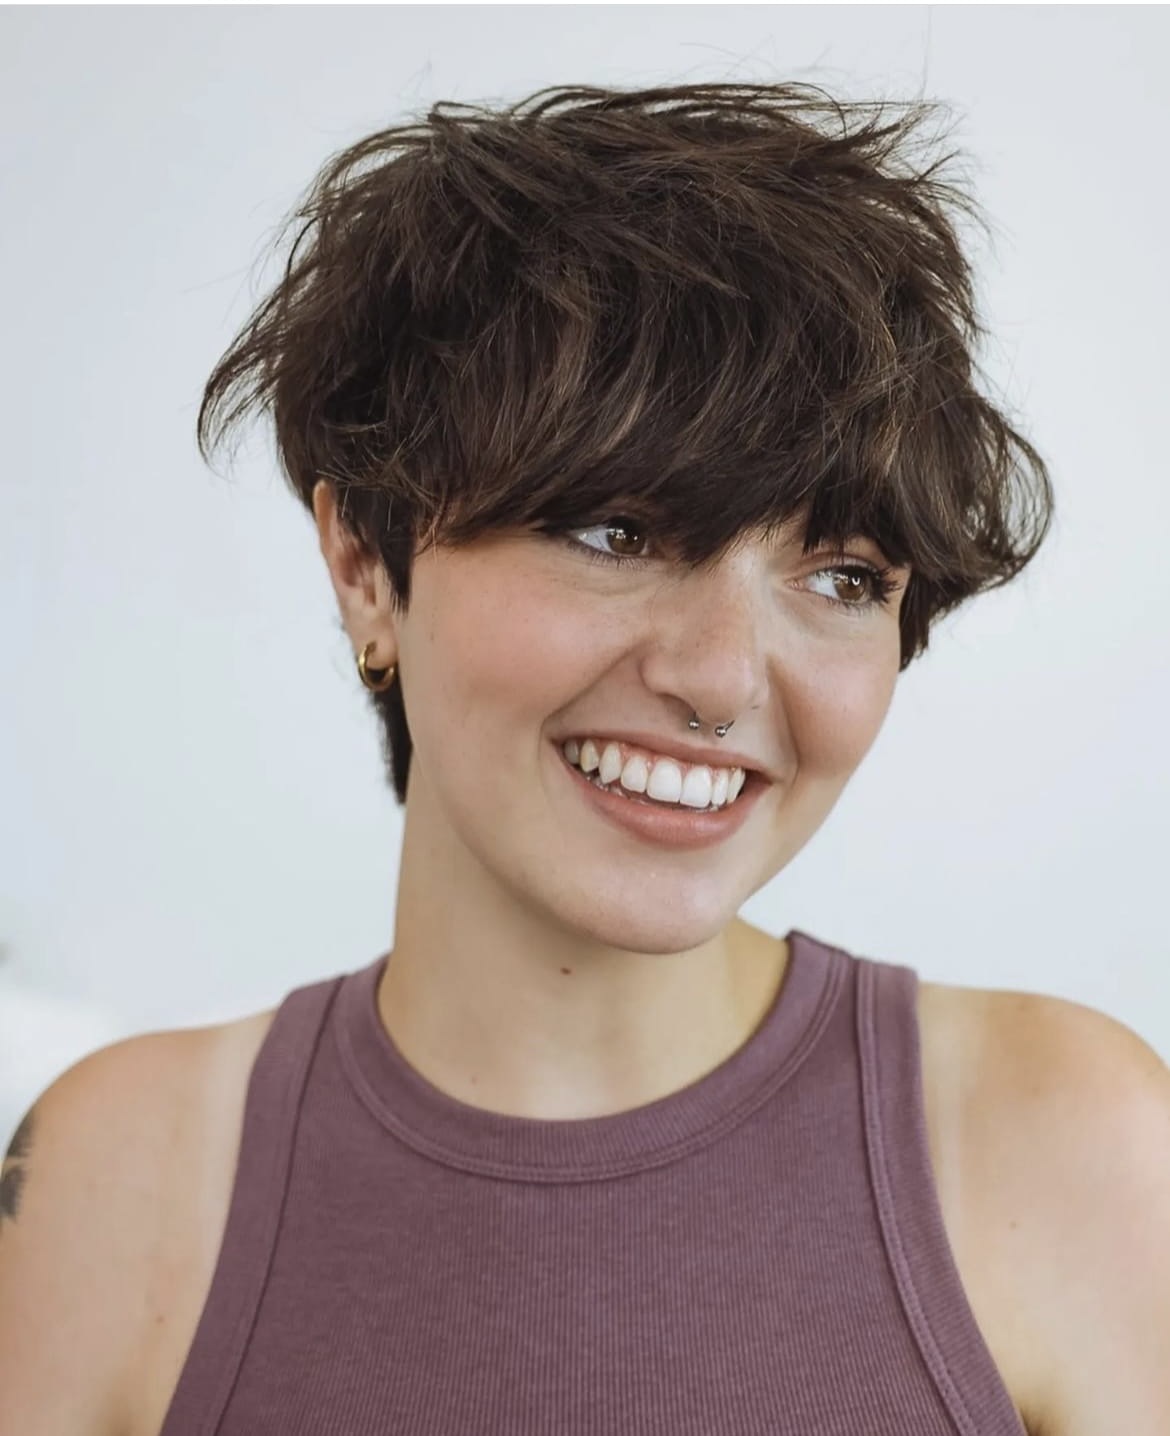 100+ Best Short Hairstyles & Haircuts For Women images 32